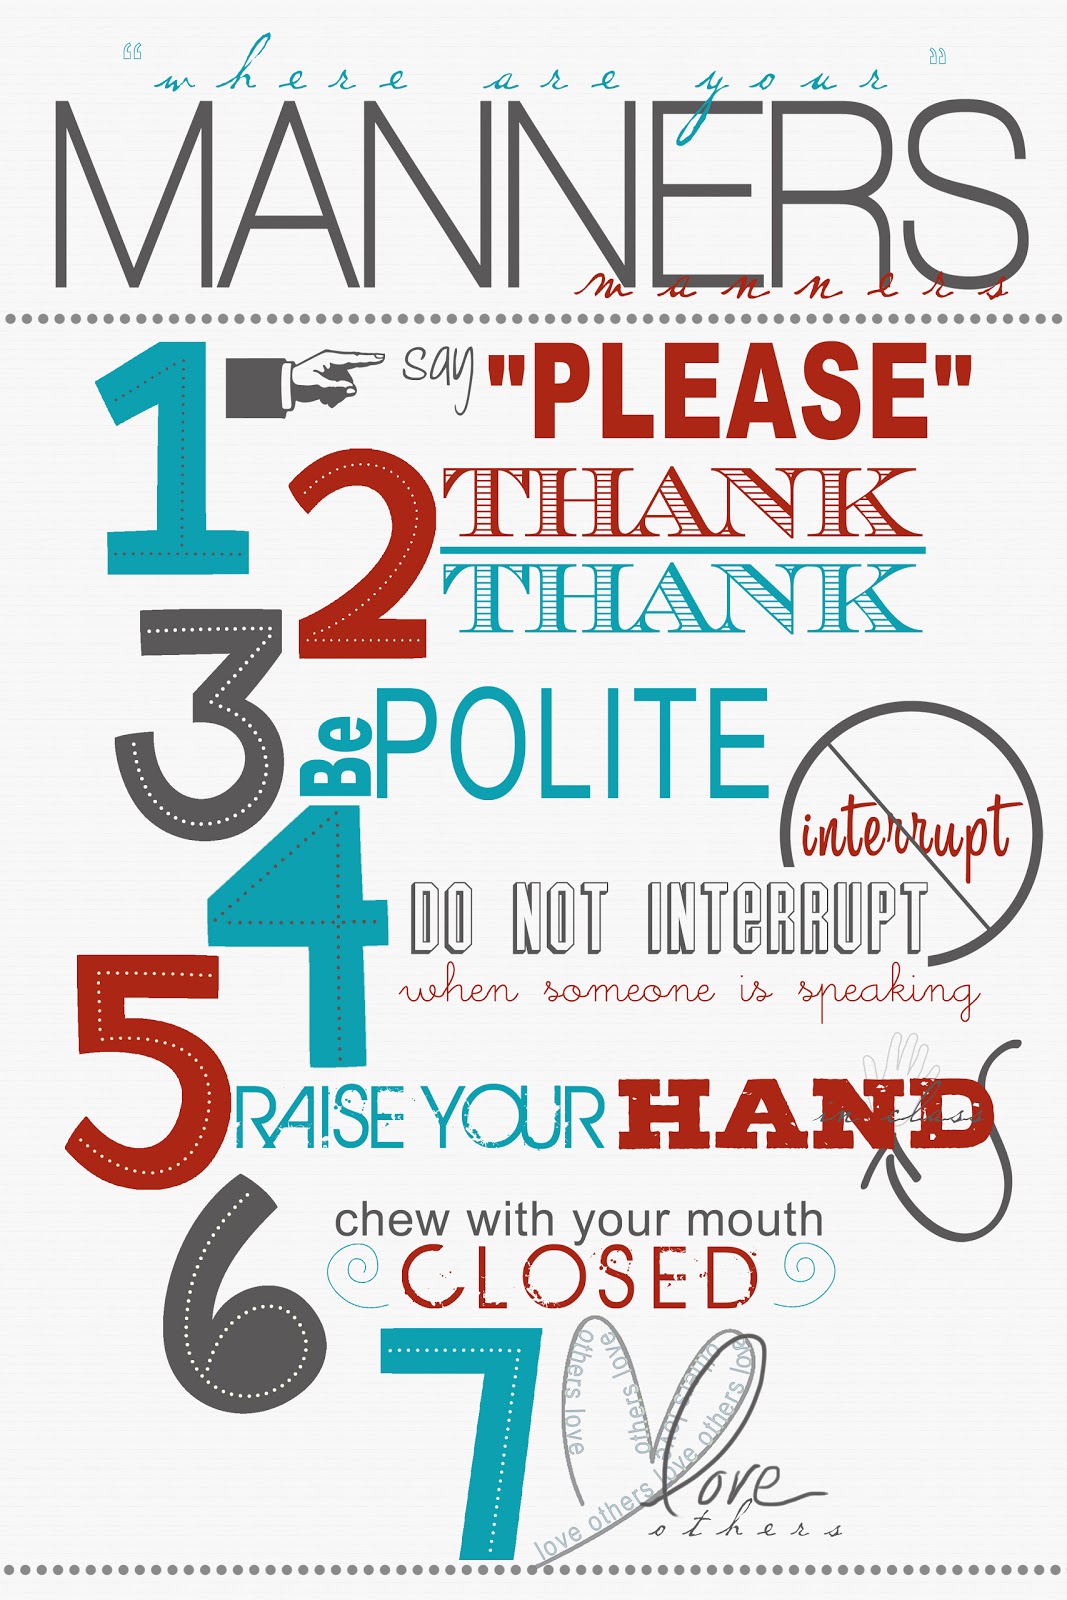 clip art on good manners - photo #27